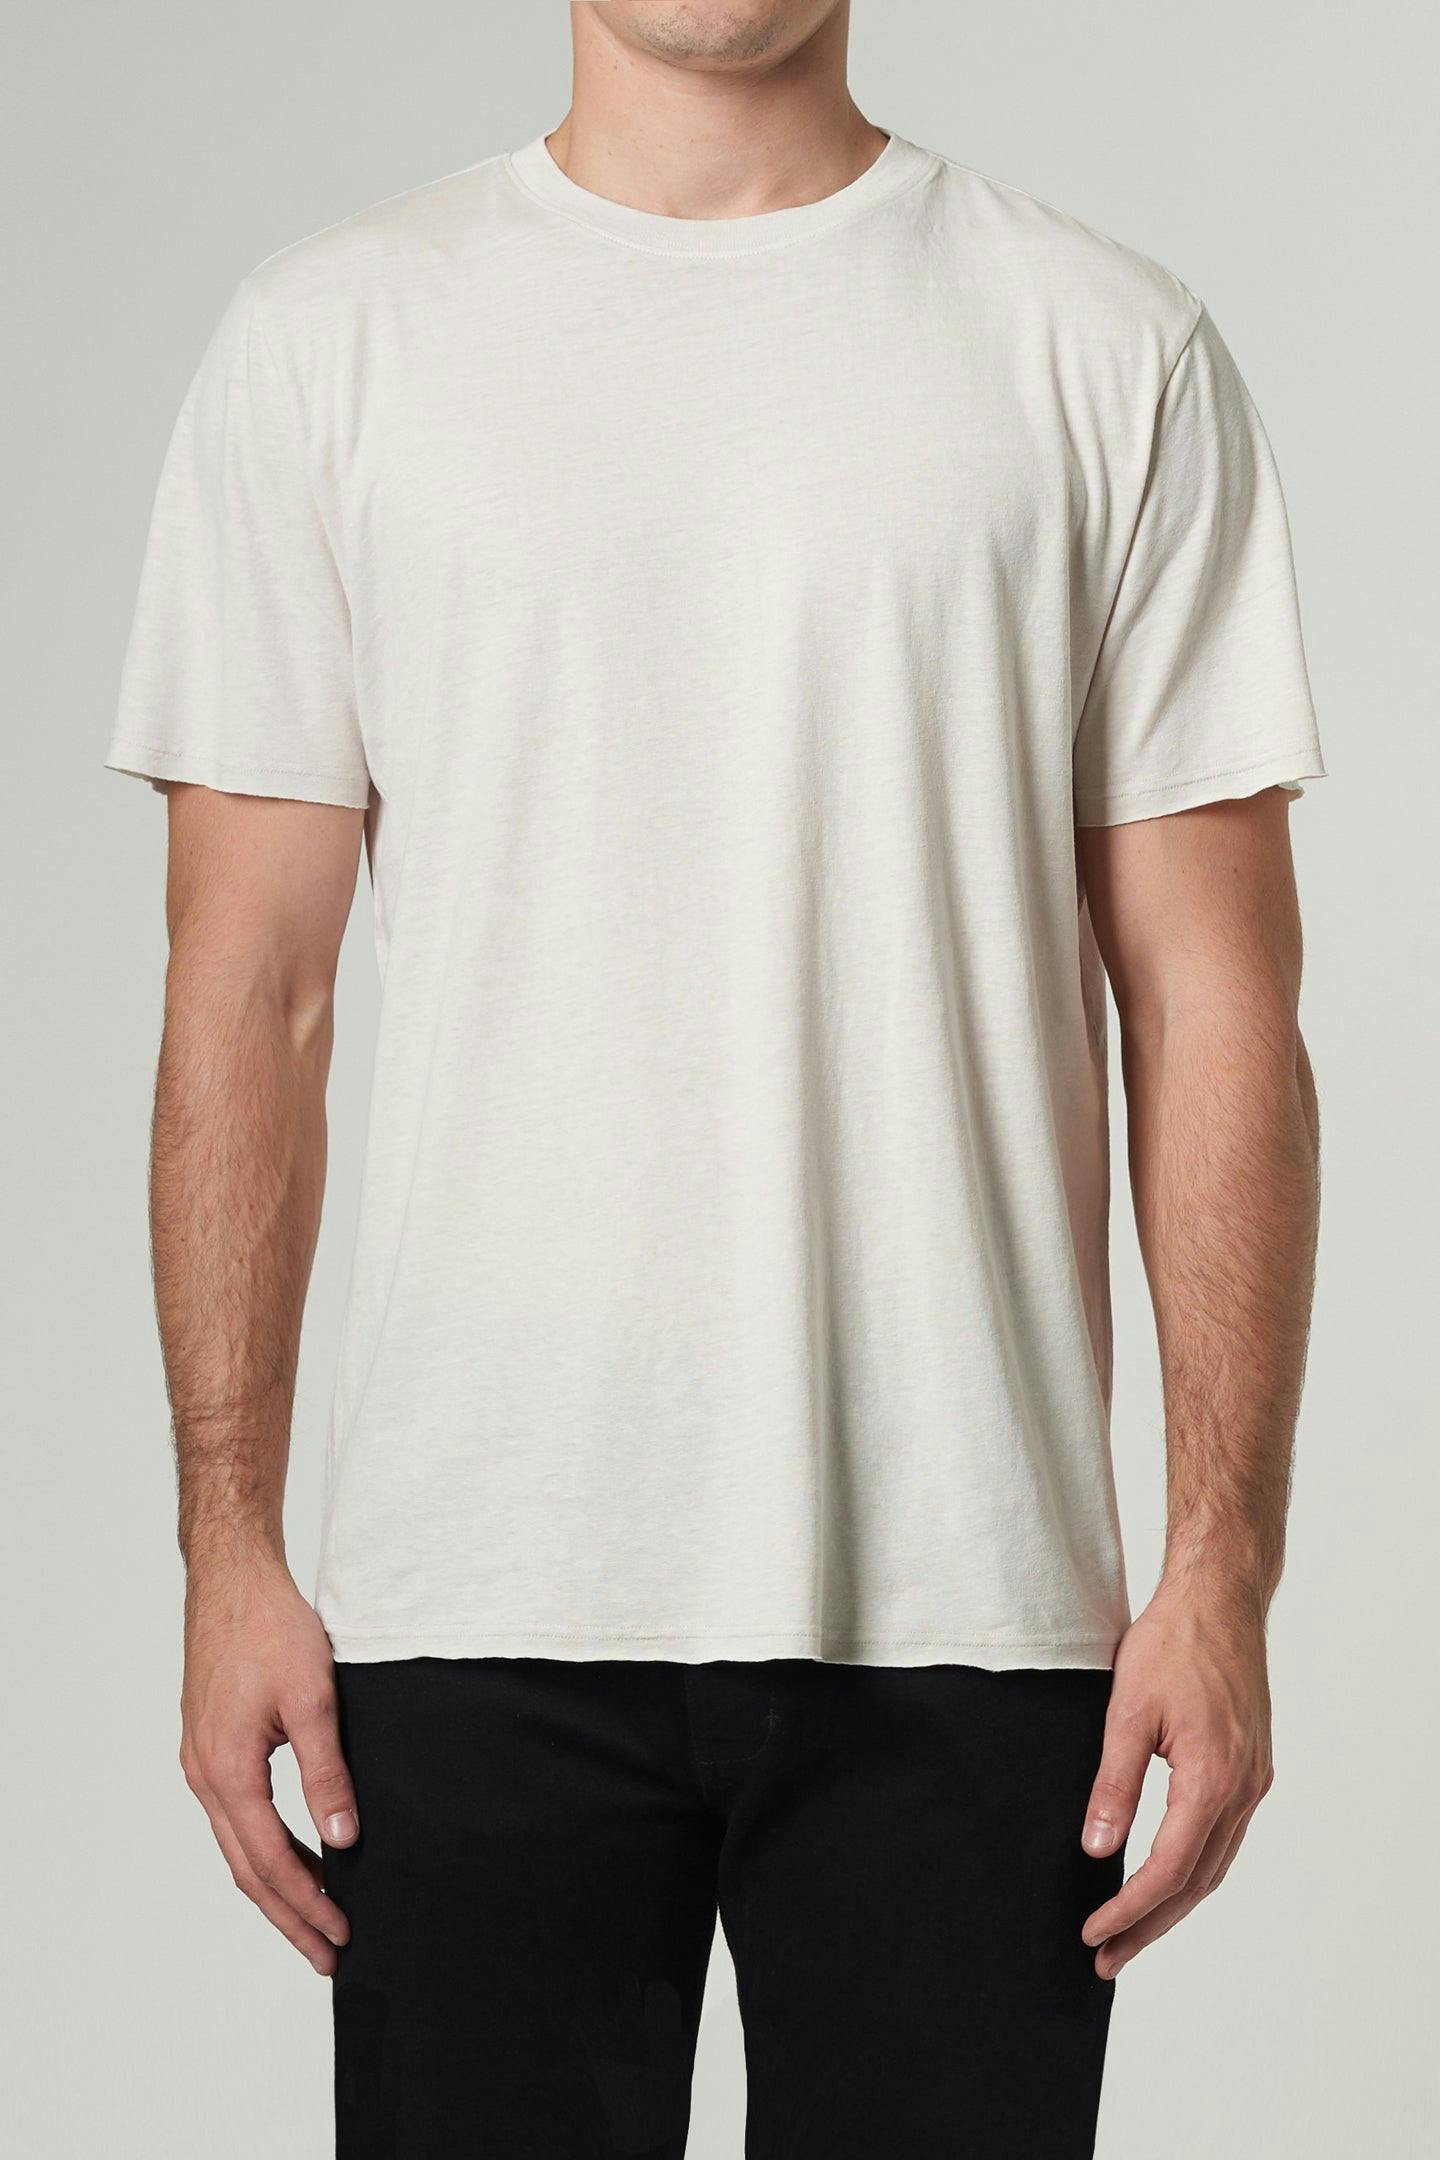 Linen Band Tee - Washed Stone Neuw relaxed lightyellow mens-t-shirt 